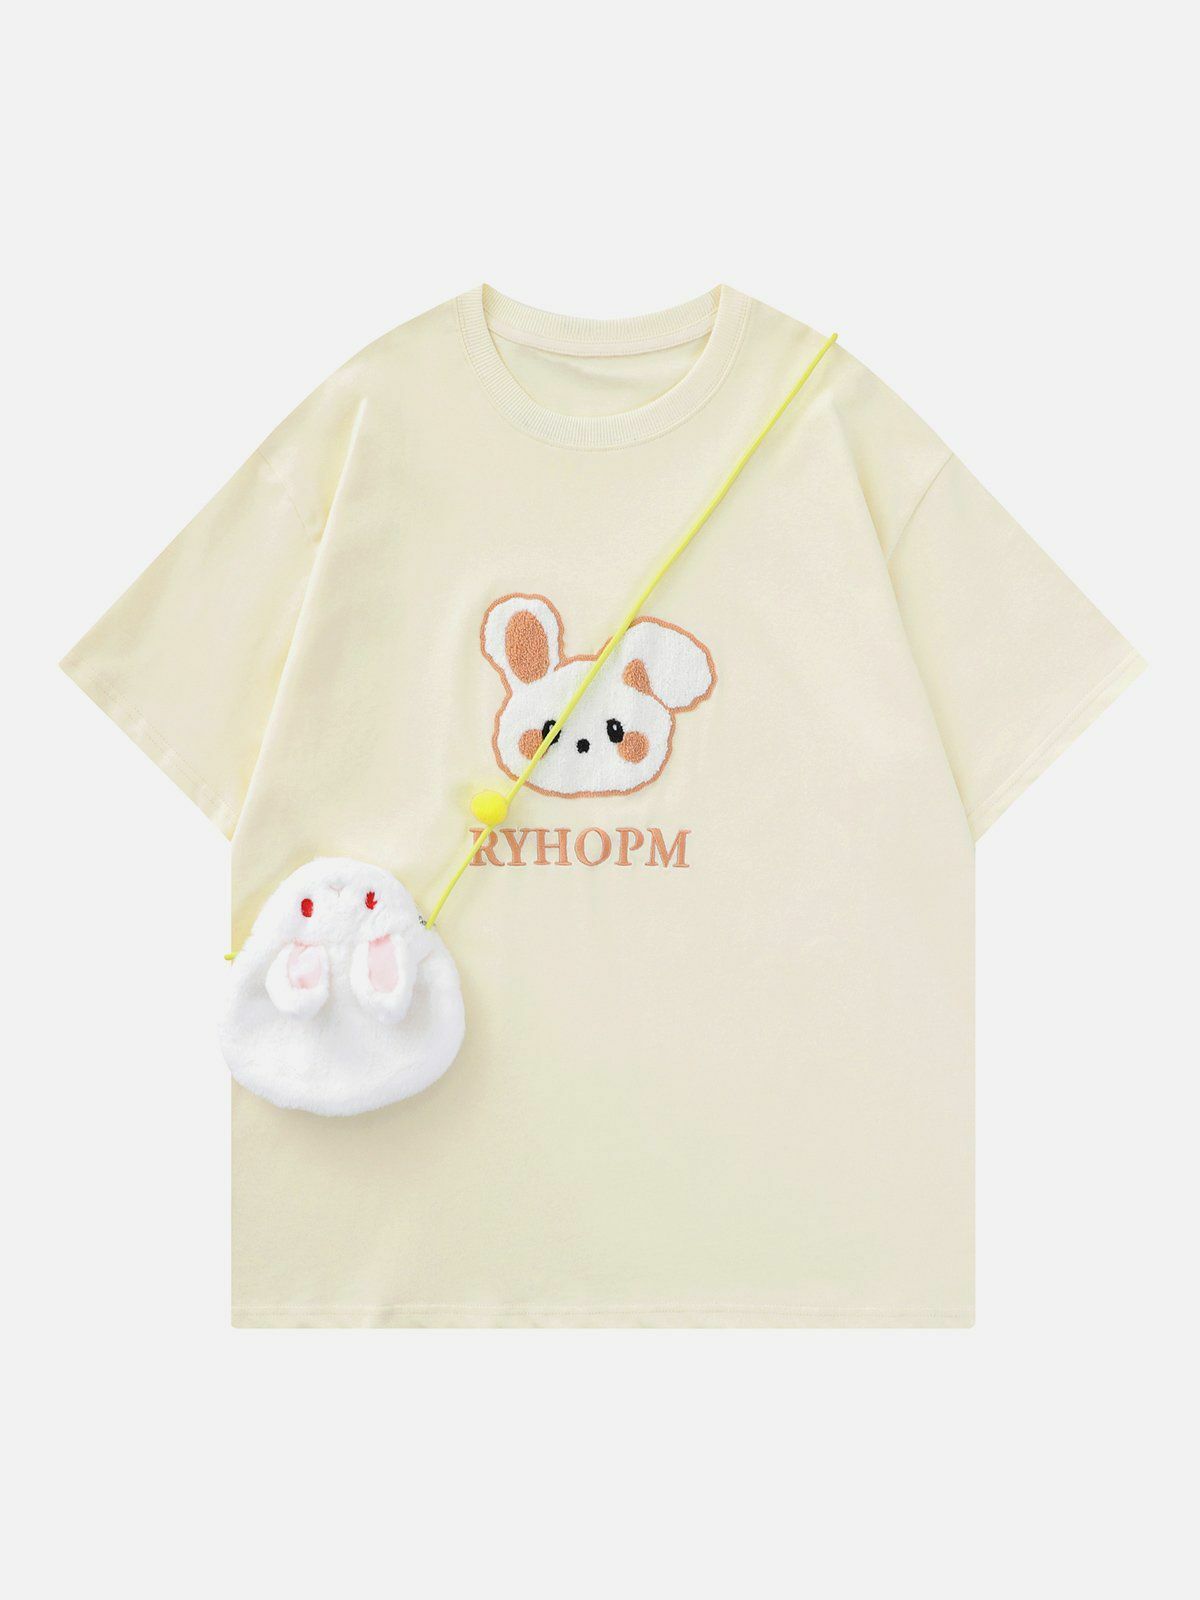 rabbit embroidery tee quirky & chic streetwear essential 8576